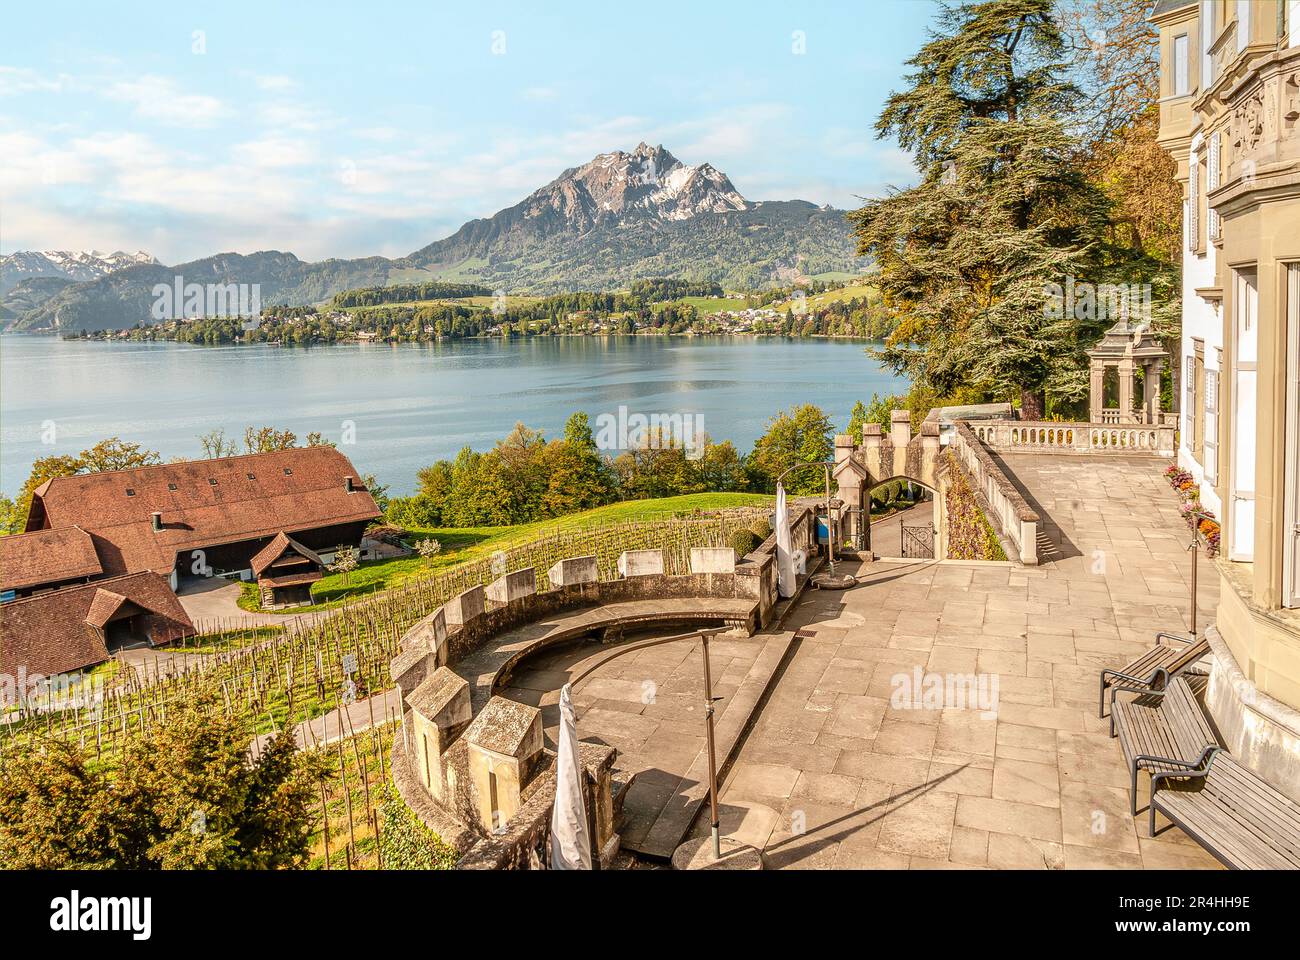 Terrace at Schloss Meggen, a  castle overlooking Lake Lucerne with Mt.Pilatus in Background, Switzerland Stock Photo